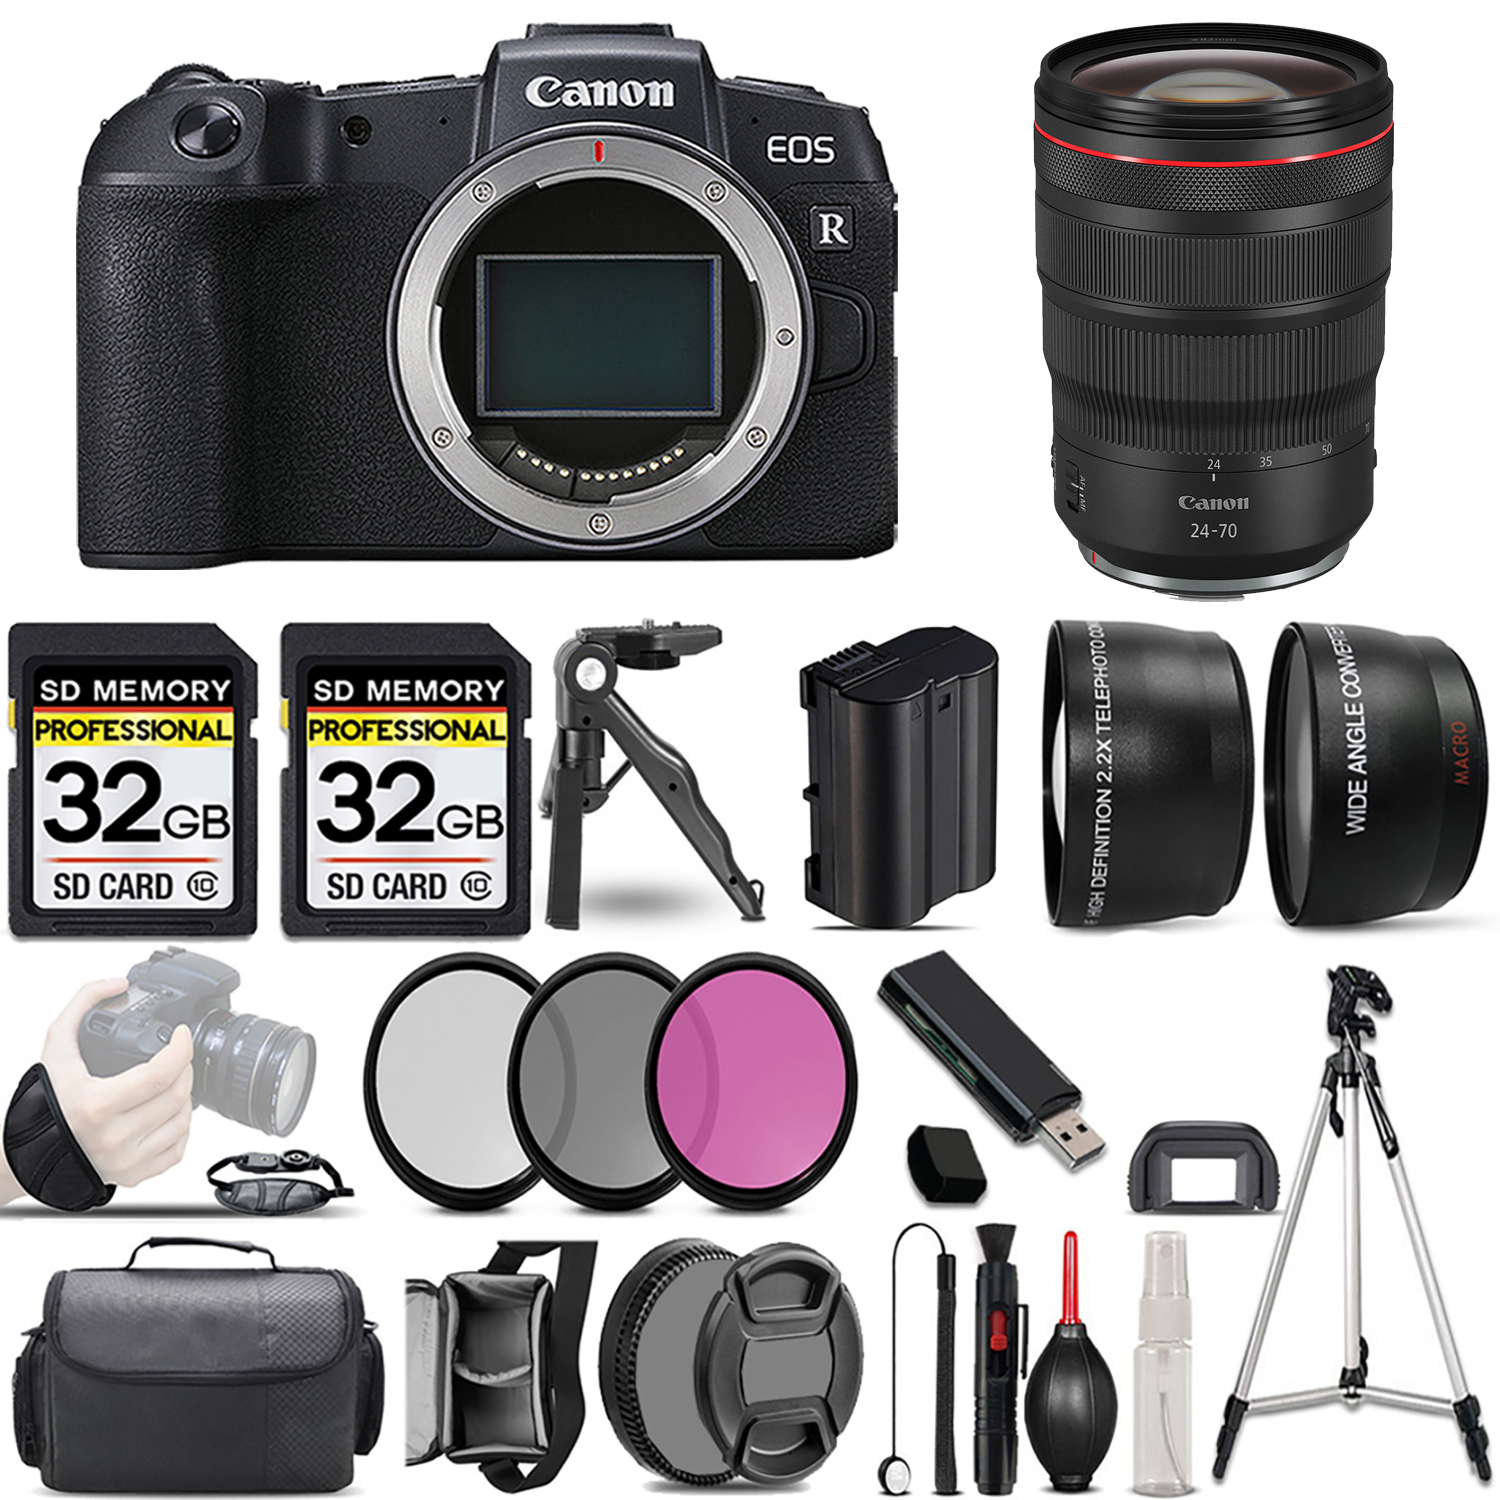 EOS RP Mirrorless Camera + 24-70mm f/2.8 L IS USM Lens + 3 Piece Filter Set + 64GB *FREE SHIPPING*